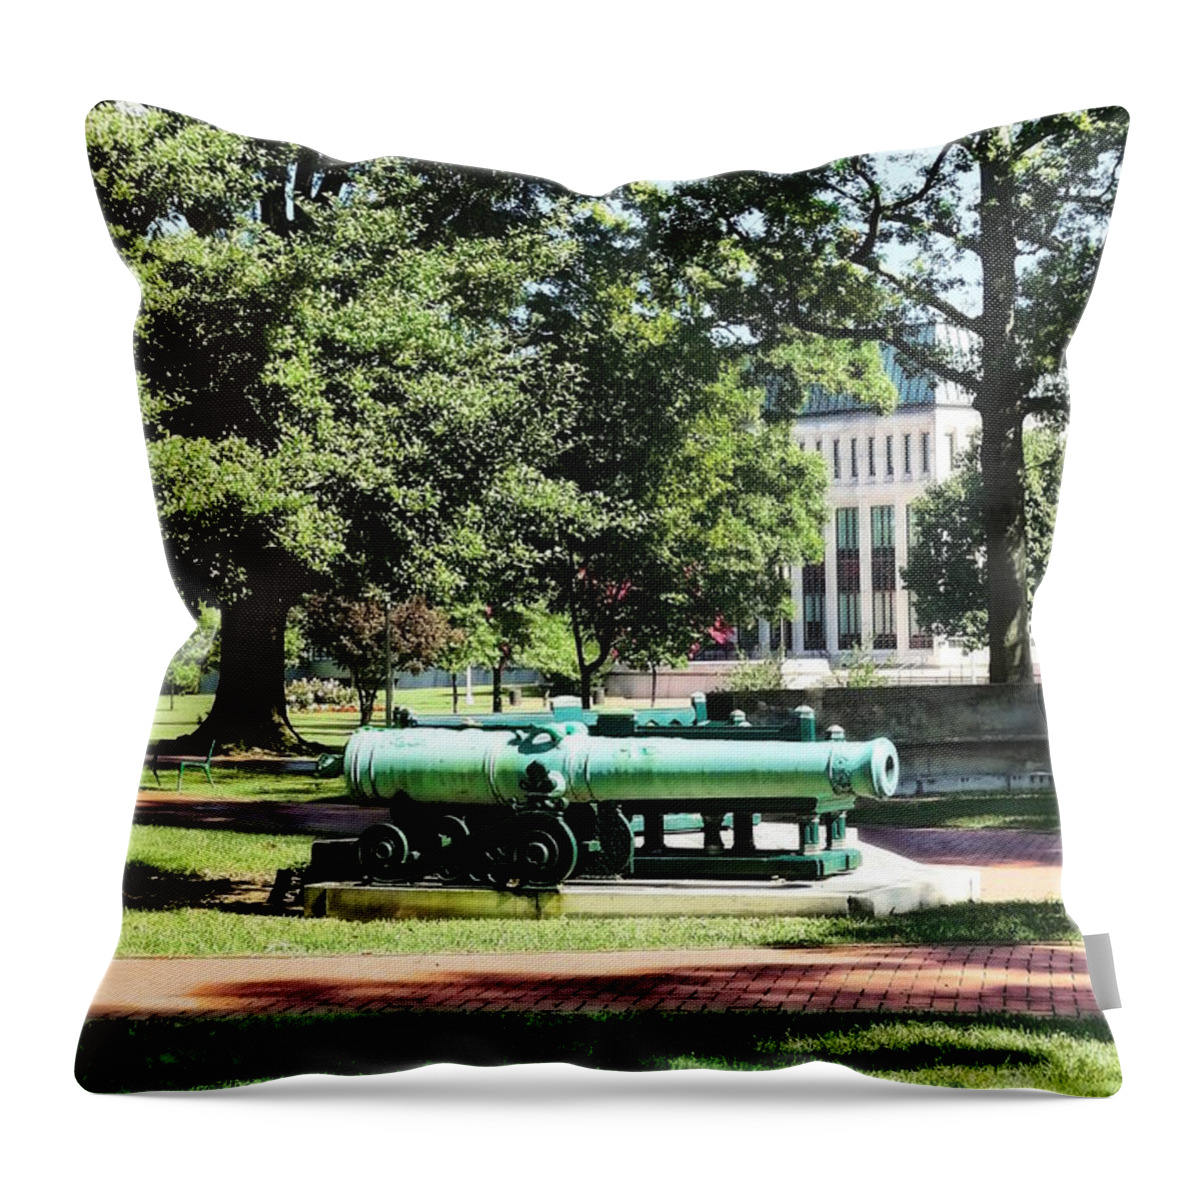 Naval Academy Throw Pillow featuring the photograph Cannon Near Tecumseh Statue by Susan Savad